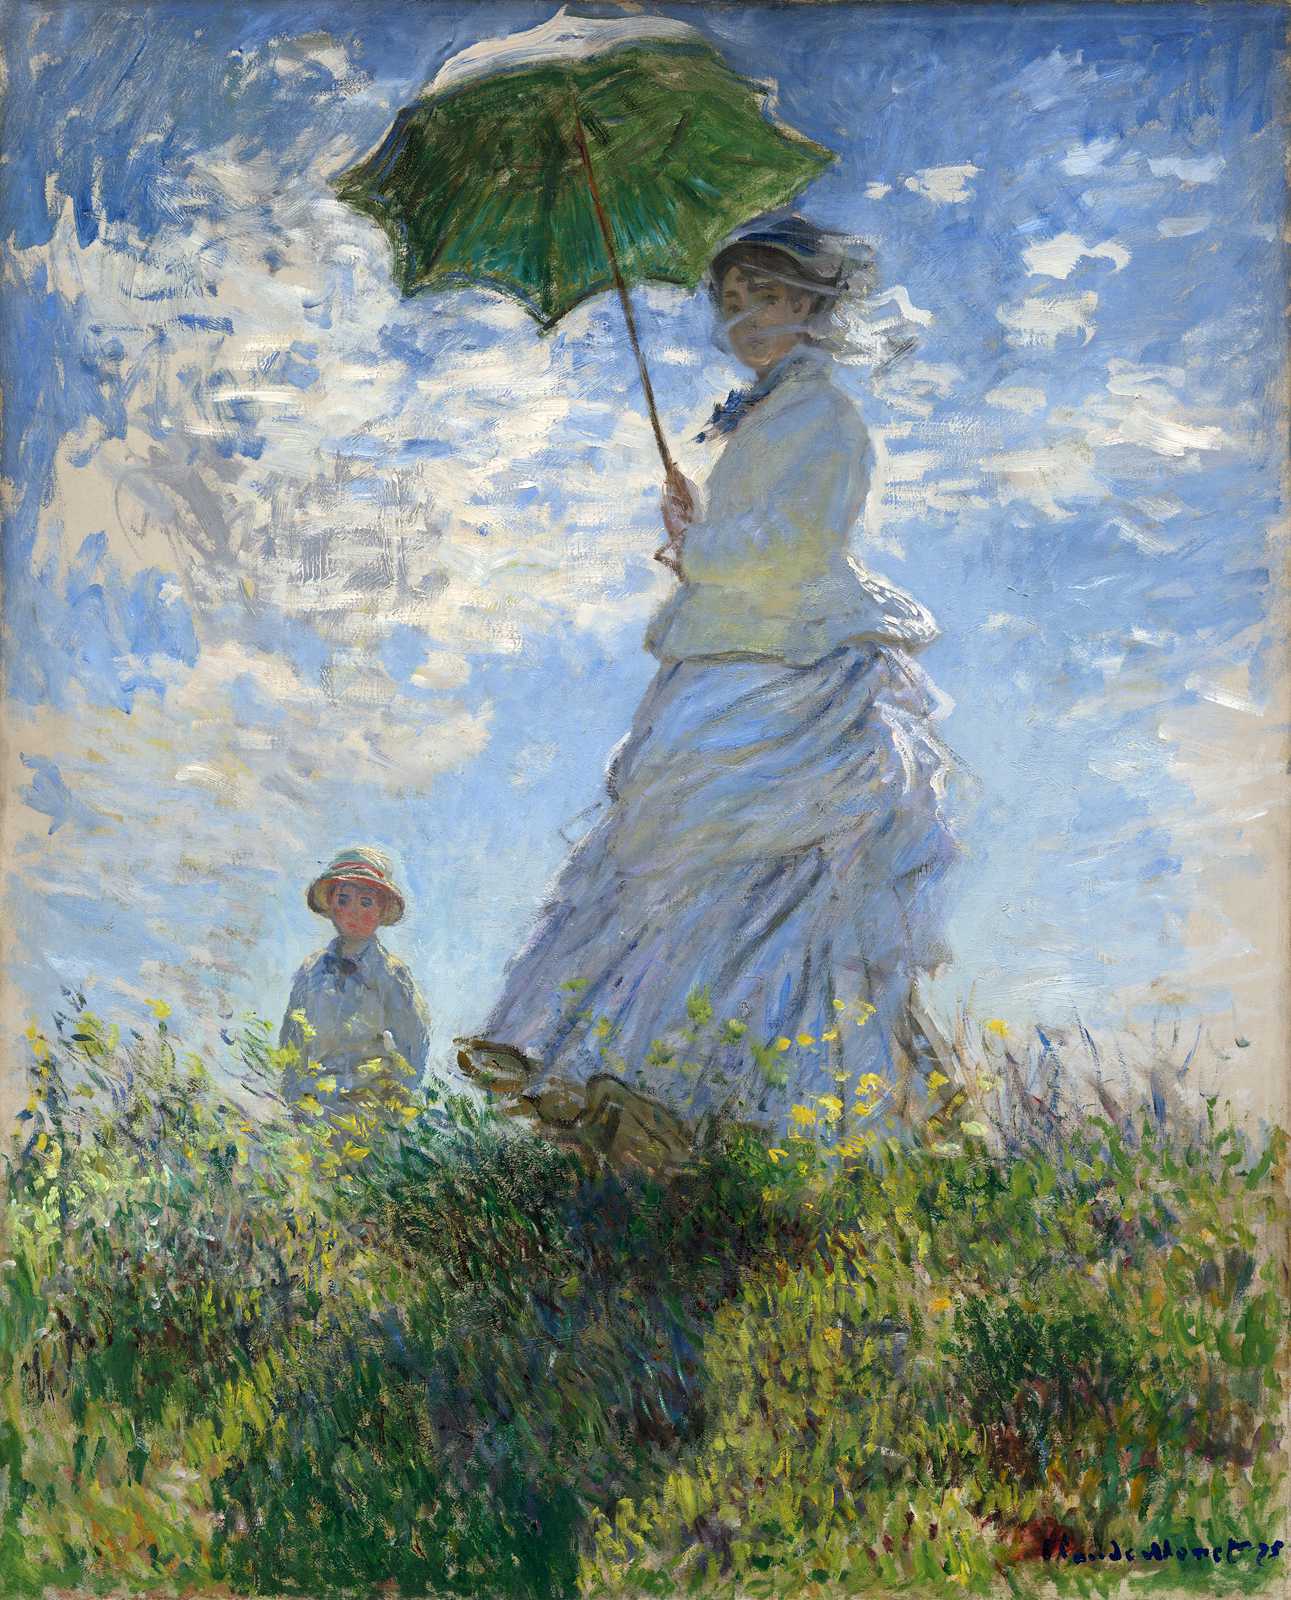 Woman with a Parasol - Madame Monet and Her Son - Monet